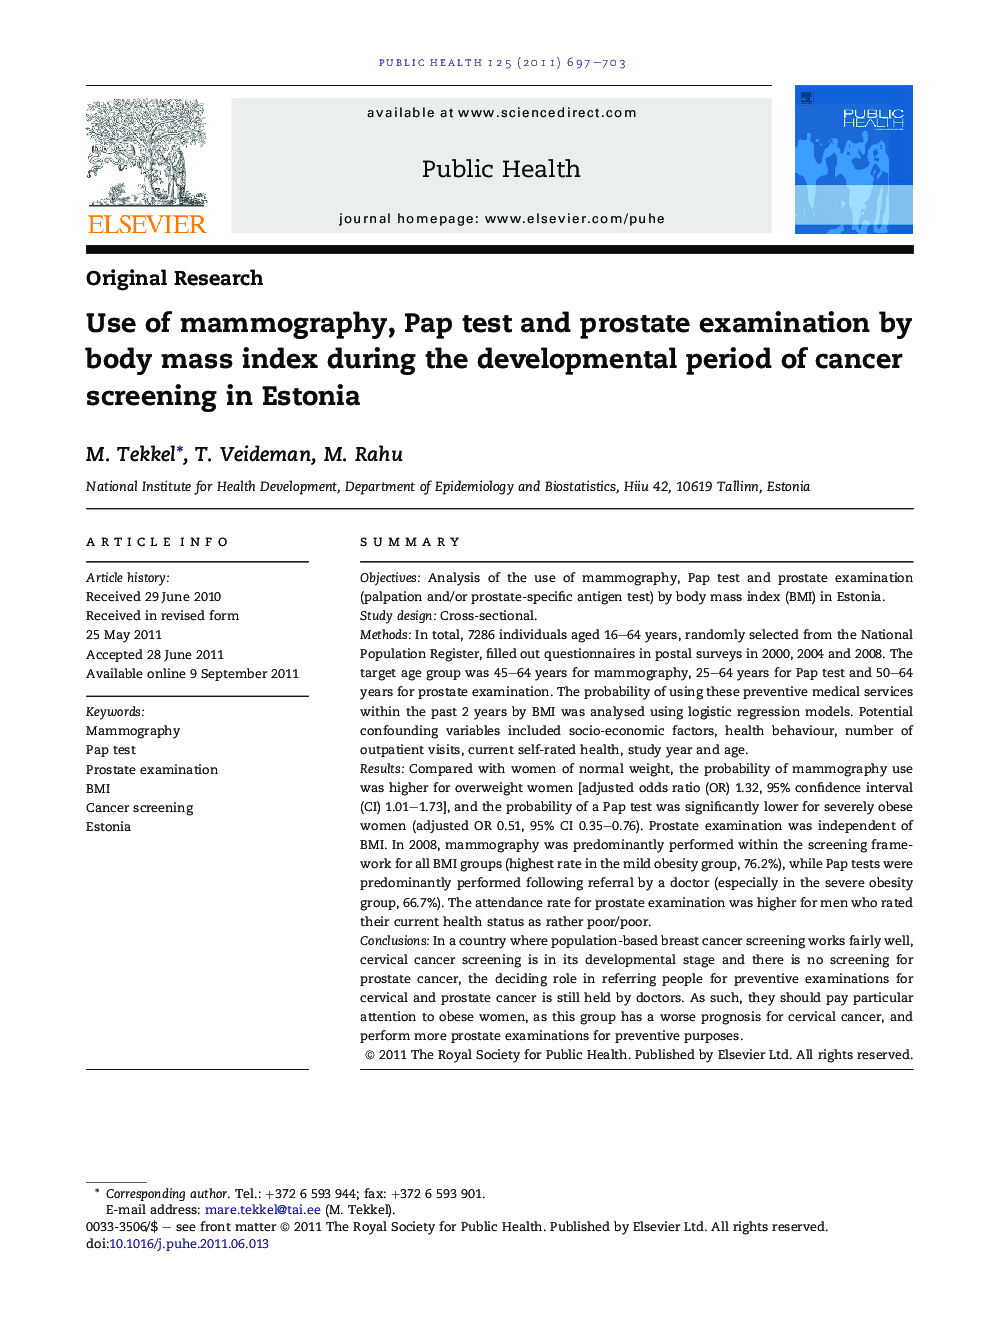 Use of mammography, Pap test and prostate examination by body mass index during the developmental period of cancer screening in Estonia